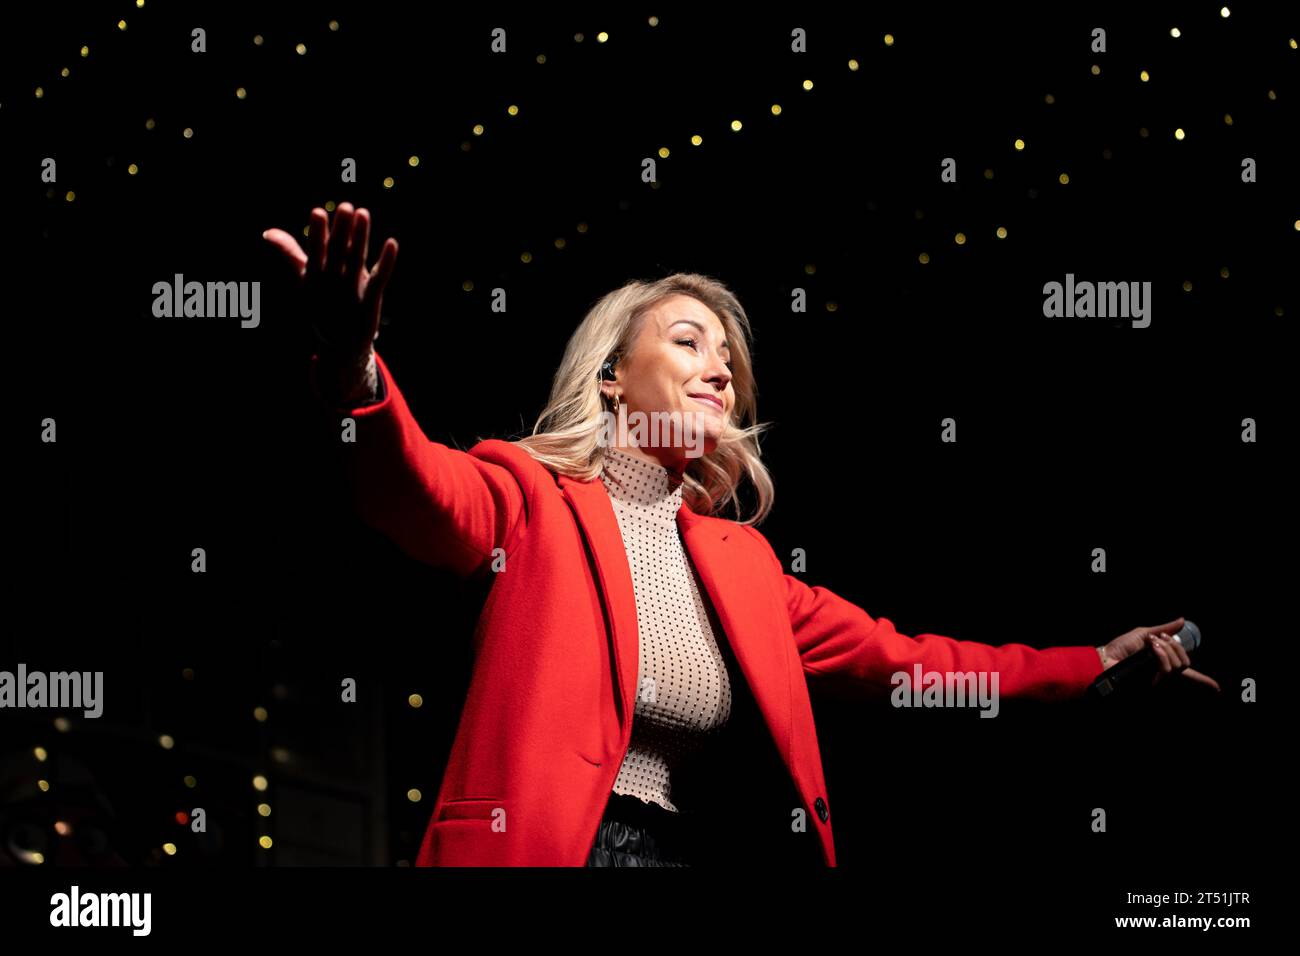 Essen, Germany. 2st November, 2023. Anna-Carina Woitschack performing at the Christmas market in Essen-Steele, Germany. Credit: Sarah Lobin/Alamy Live News. Stock Photo